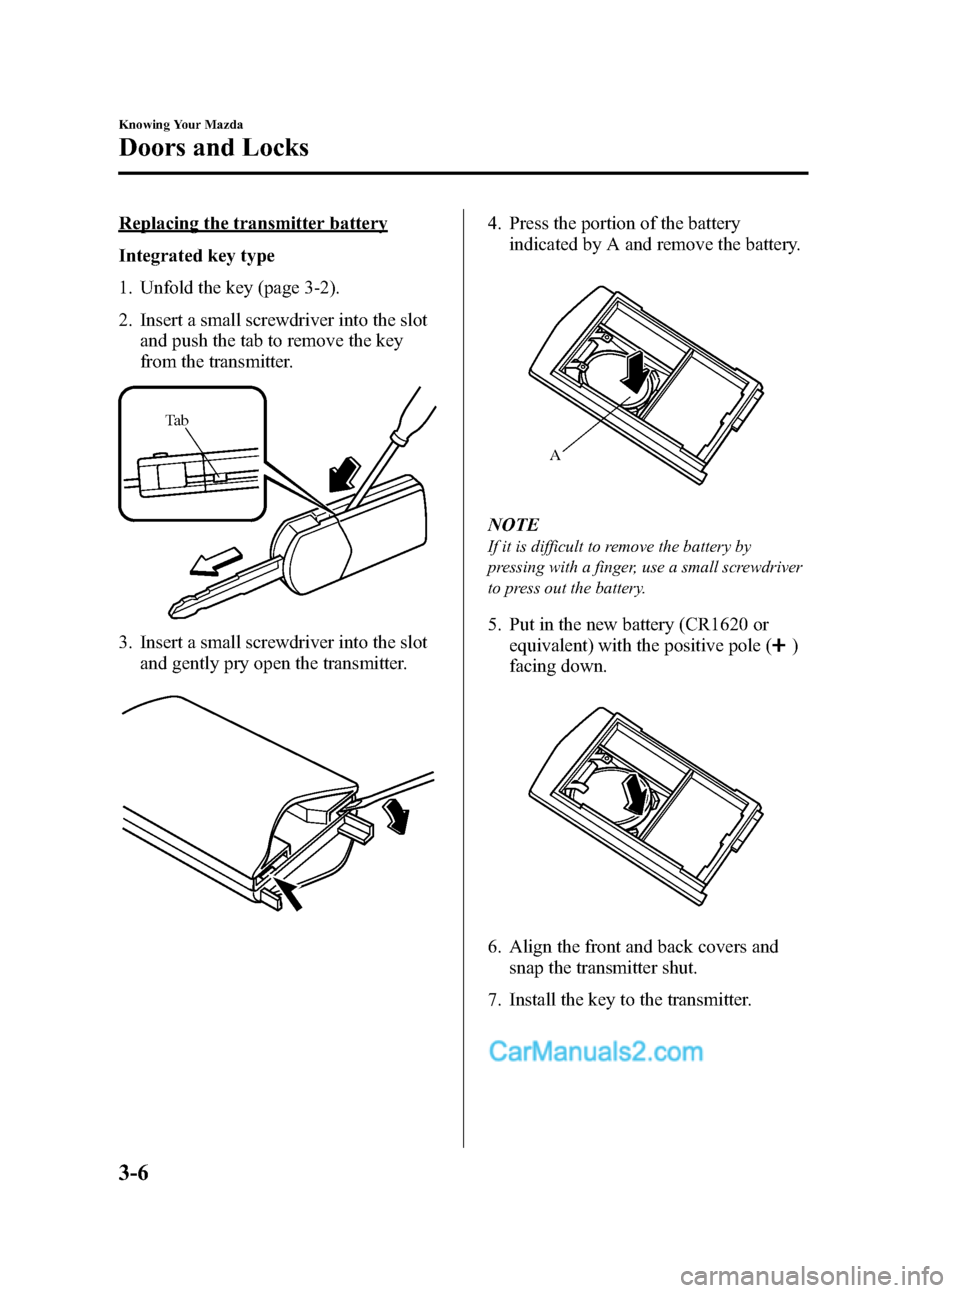 MAZDA MODEL MAZDASPEED 3 2008   (in English) Manual PDF Black plate (78,1)
Replacing the transmitter battery
Integrated key type
1. Unfold the key (page 3-2).
2. Insert a small screwdriver into the slot
and push the tab to remove the key
from the transmitt